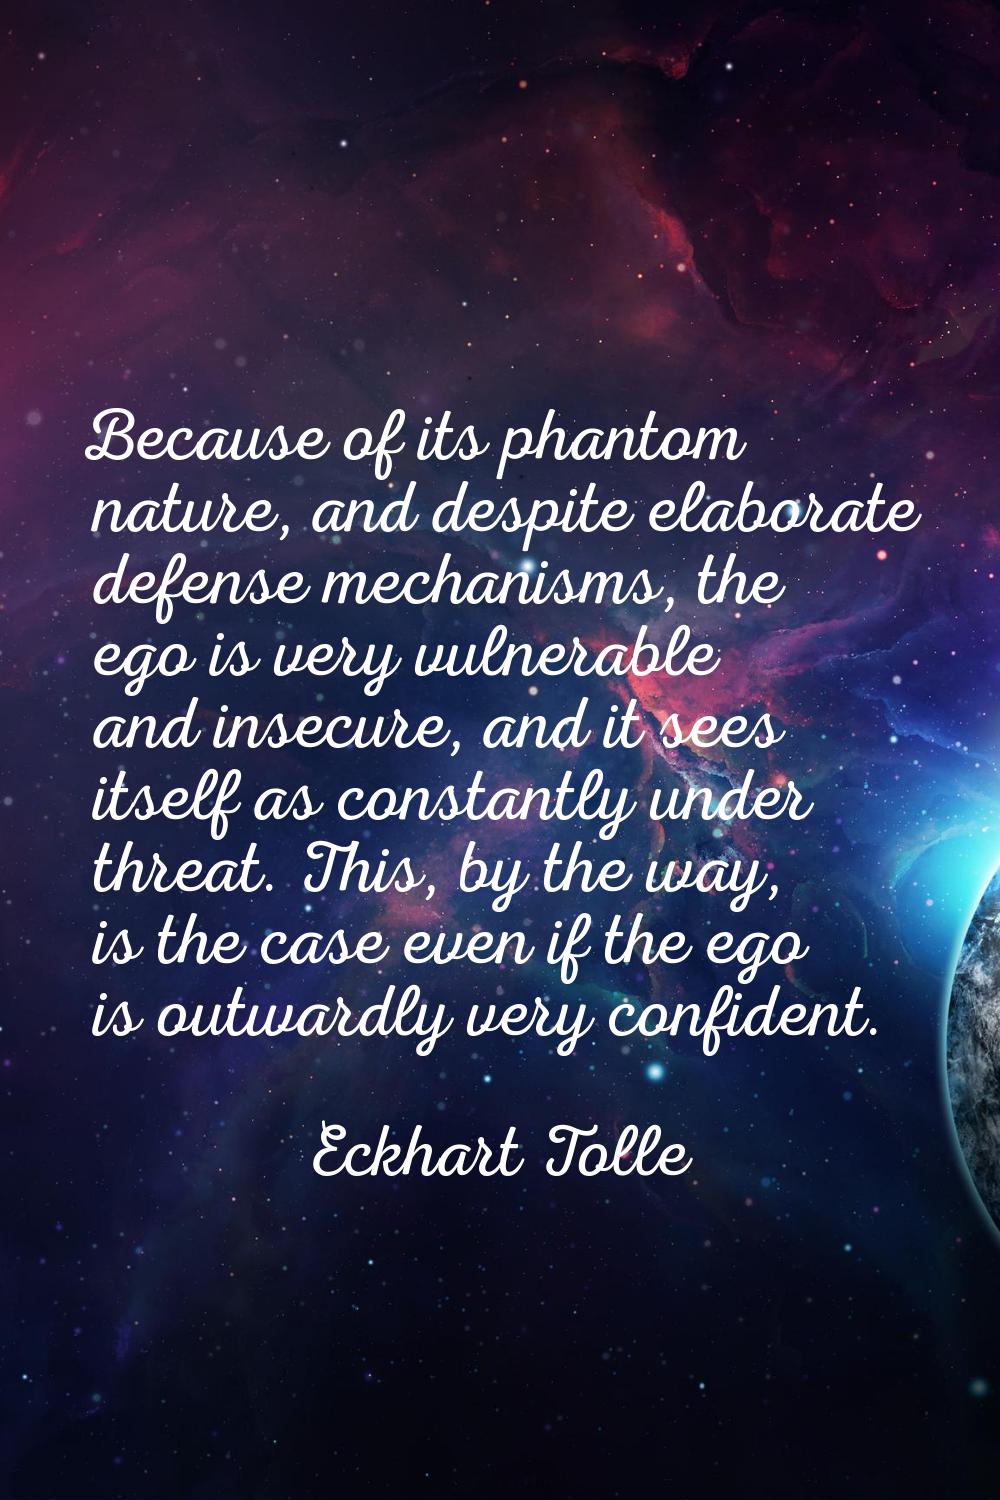 Because of its phantom nature, and despite elaborate defense mechanisms, the ego is very vulnerable